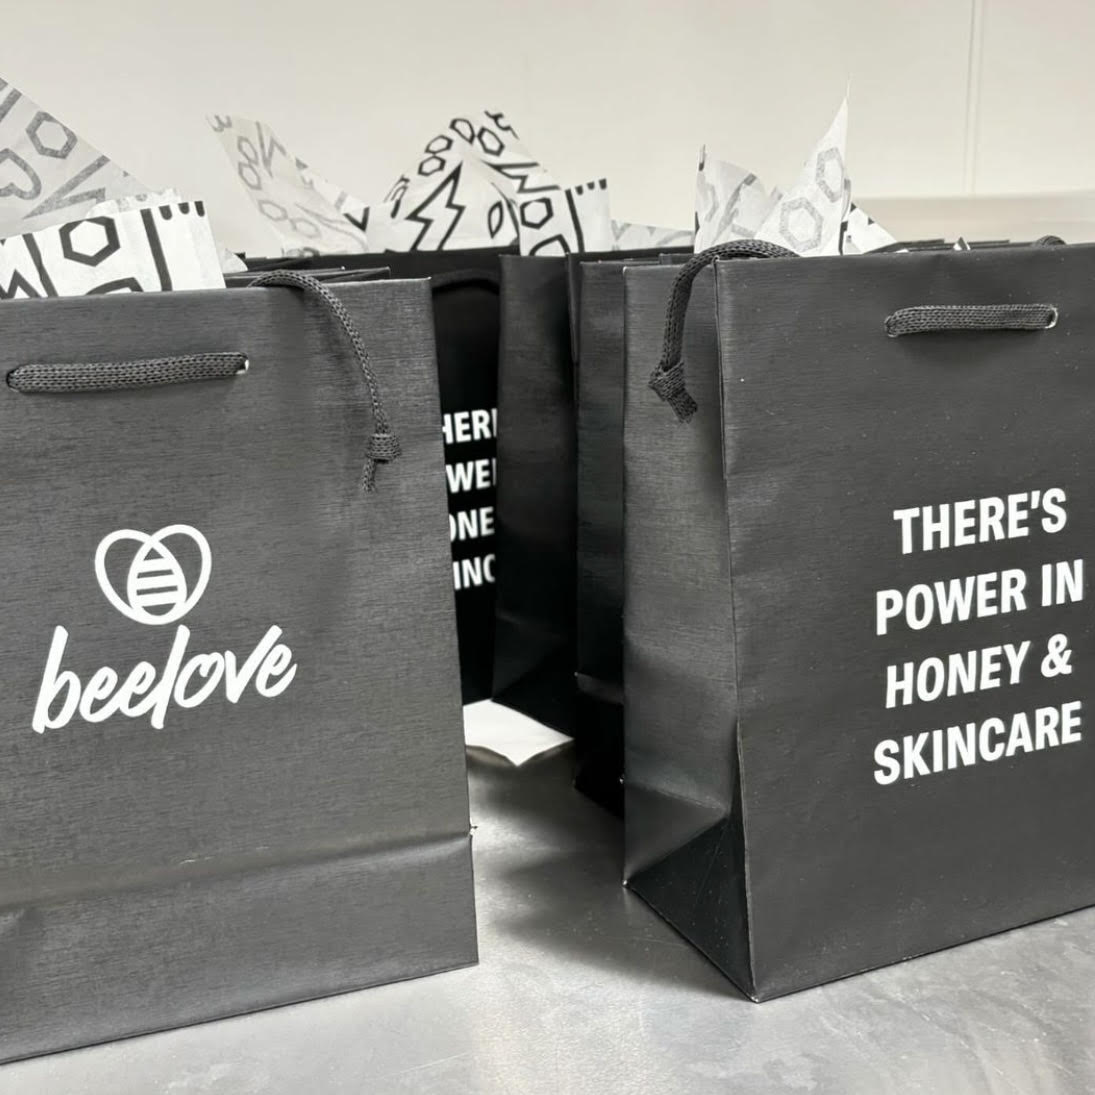 A set of black gift bags featuring NLEN's Beelove brand logo and slogan, "There's power in honey and skincare."